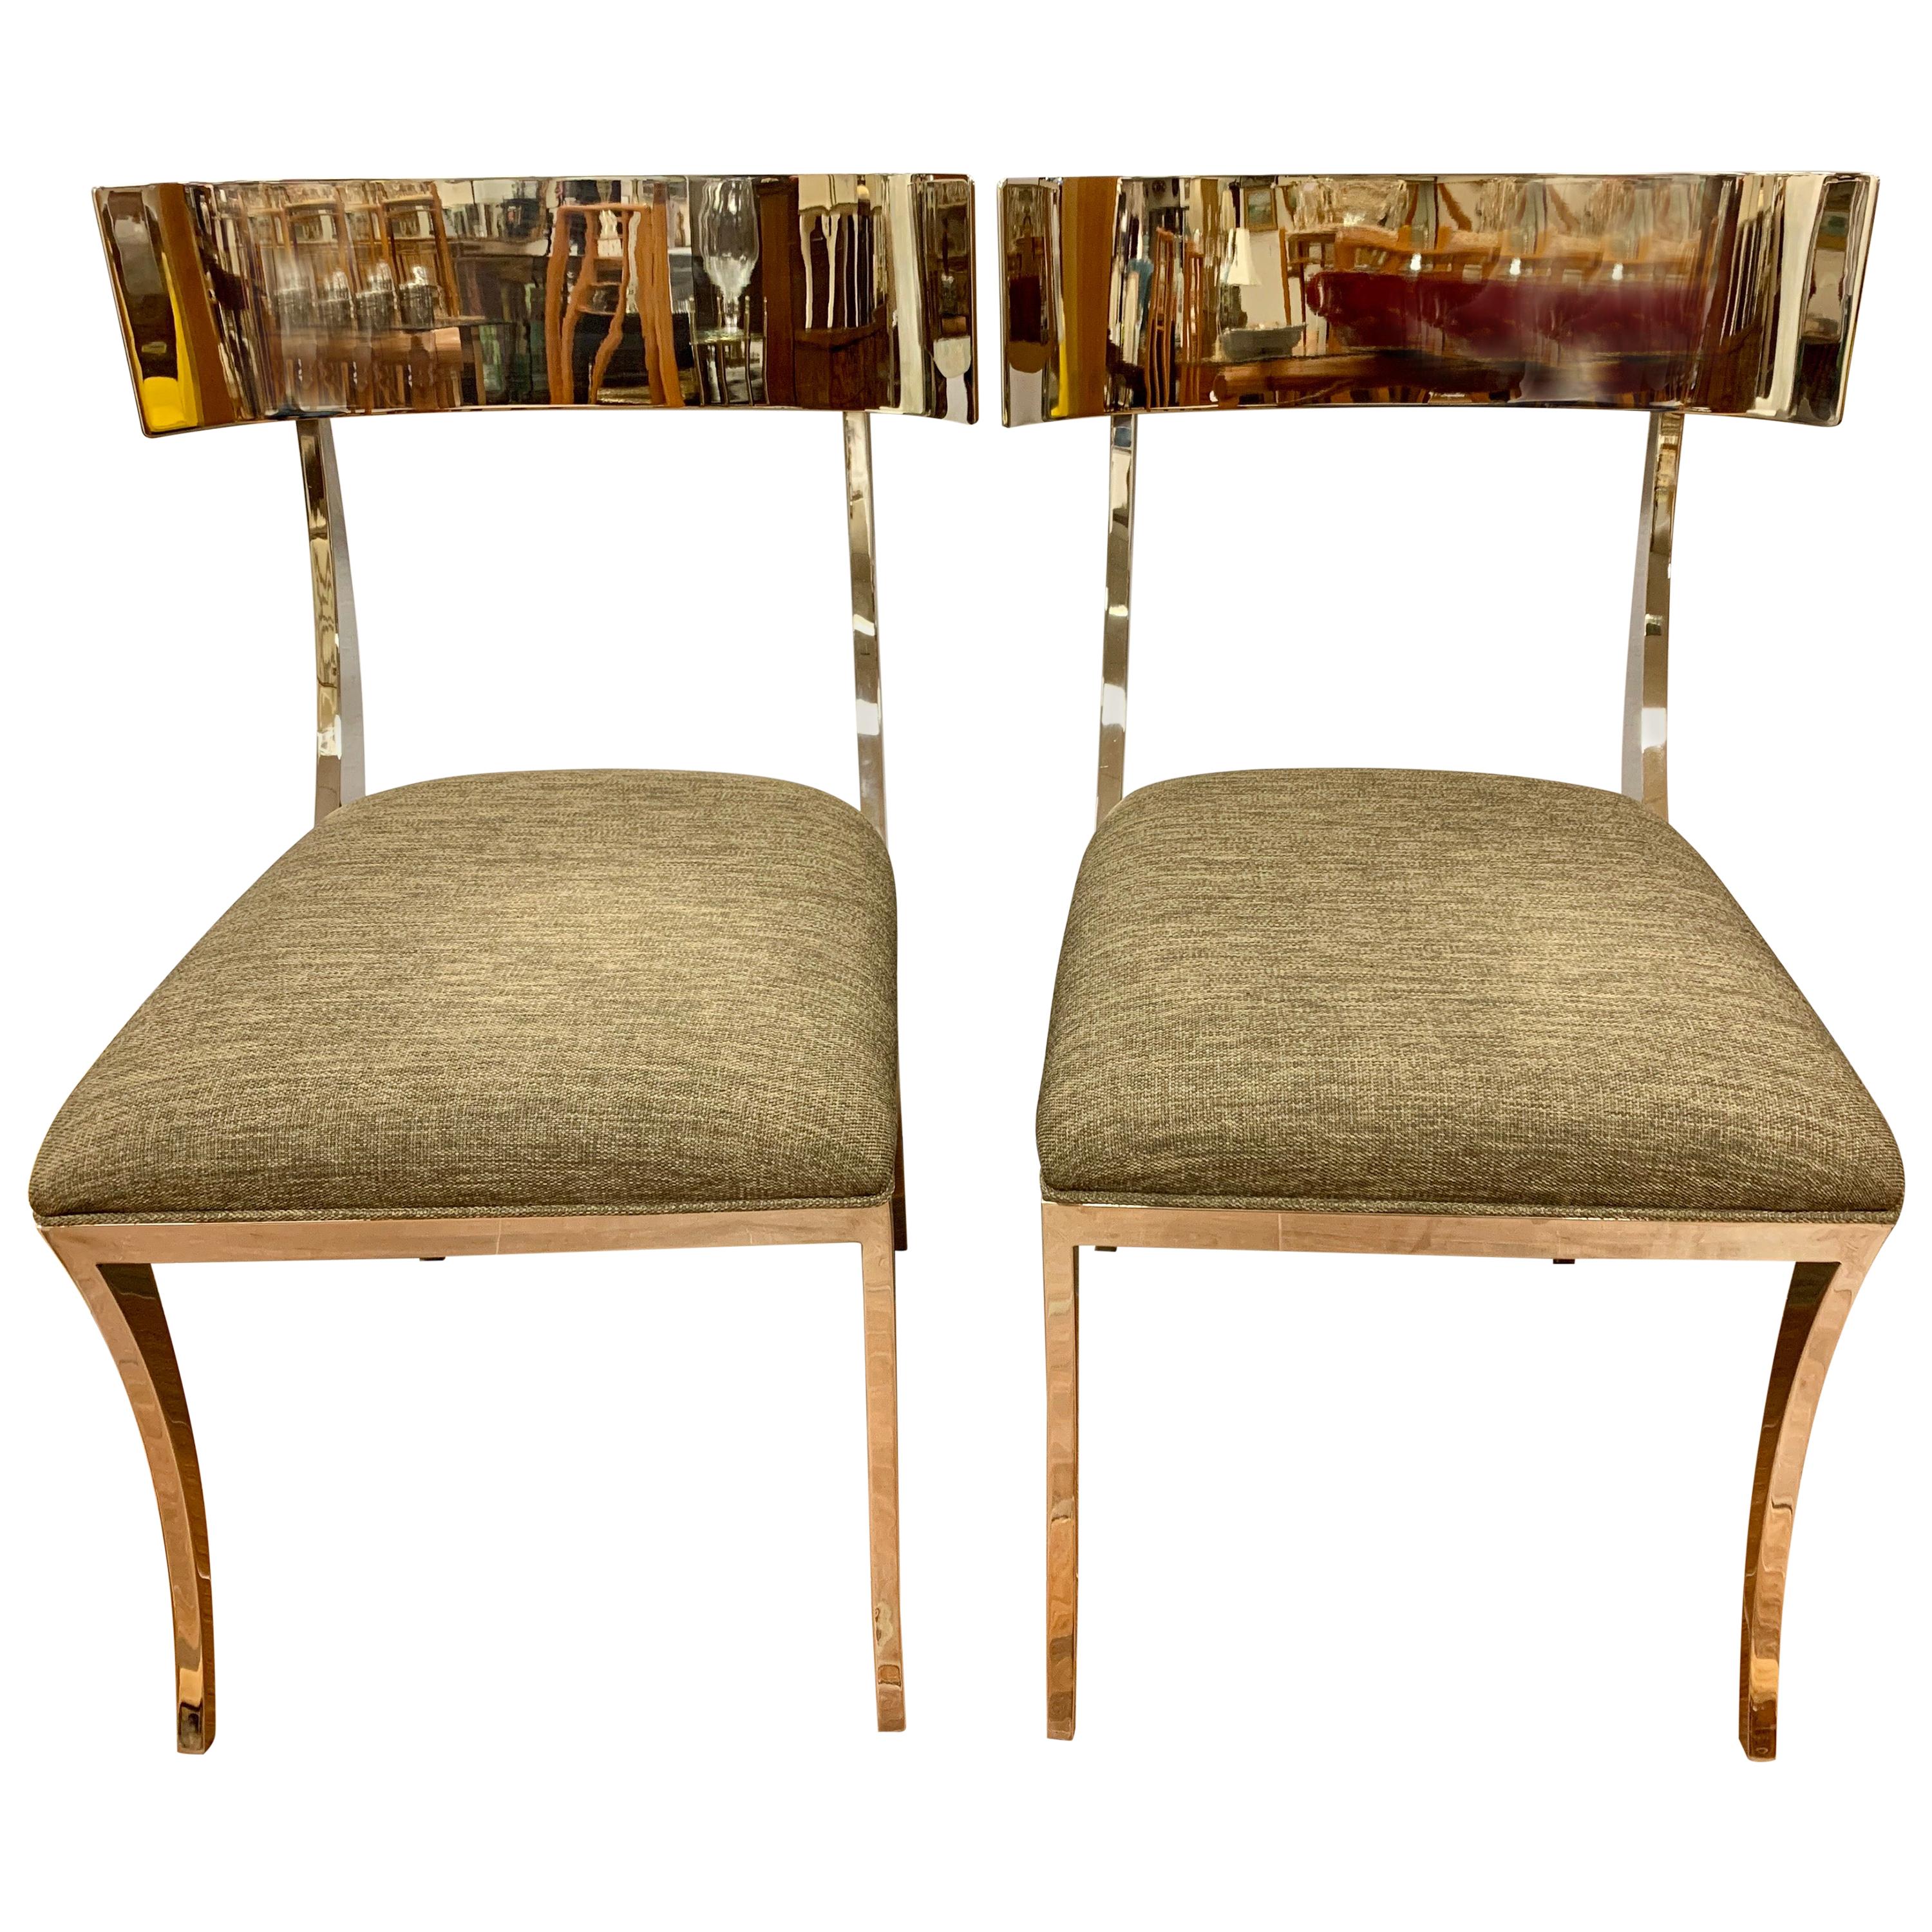 Pair of Neoclassical Style Polished Chrome Klismos Chairs